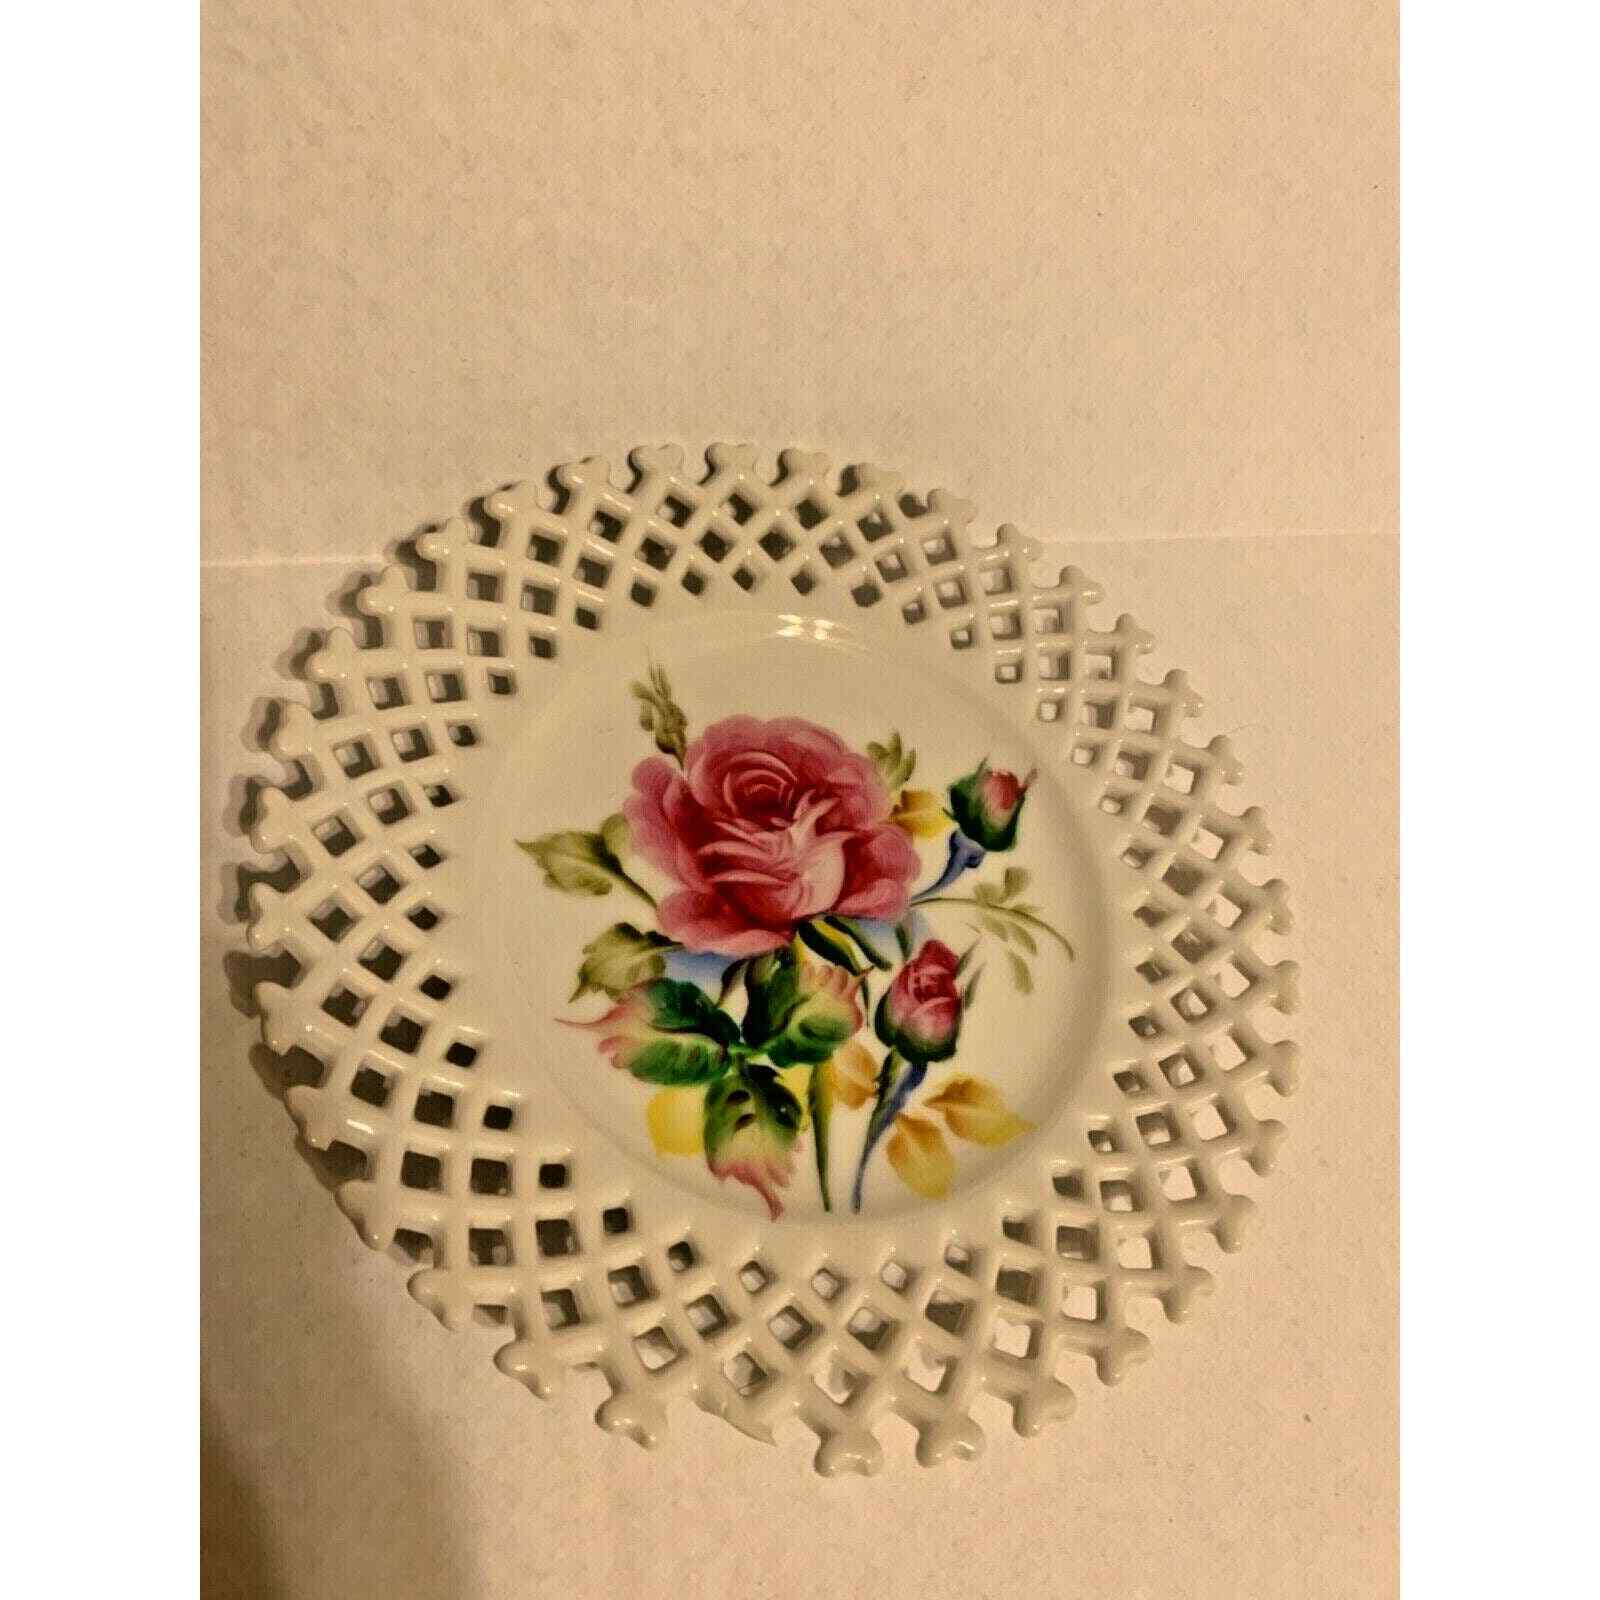 Lefton China Hand Painted Plate White with Roses Flowers Lattice Rim 8.5 inches